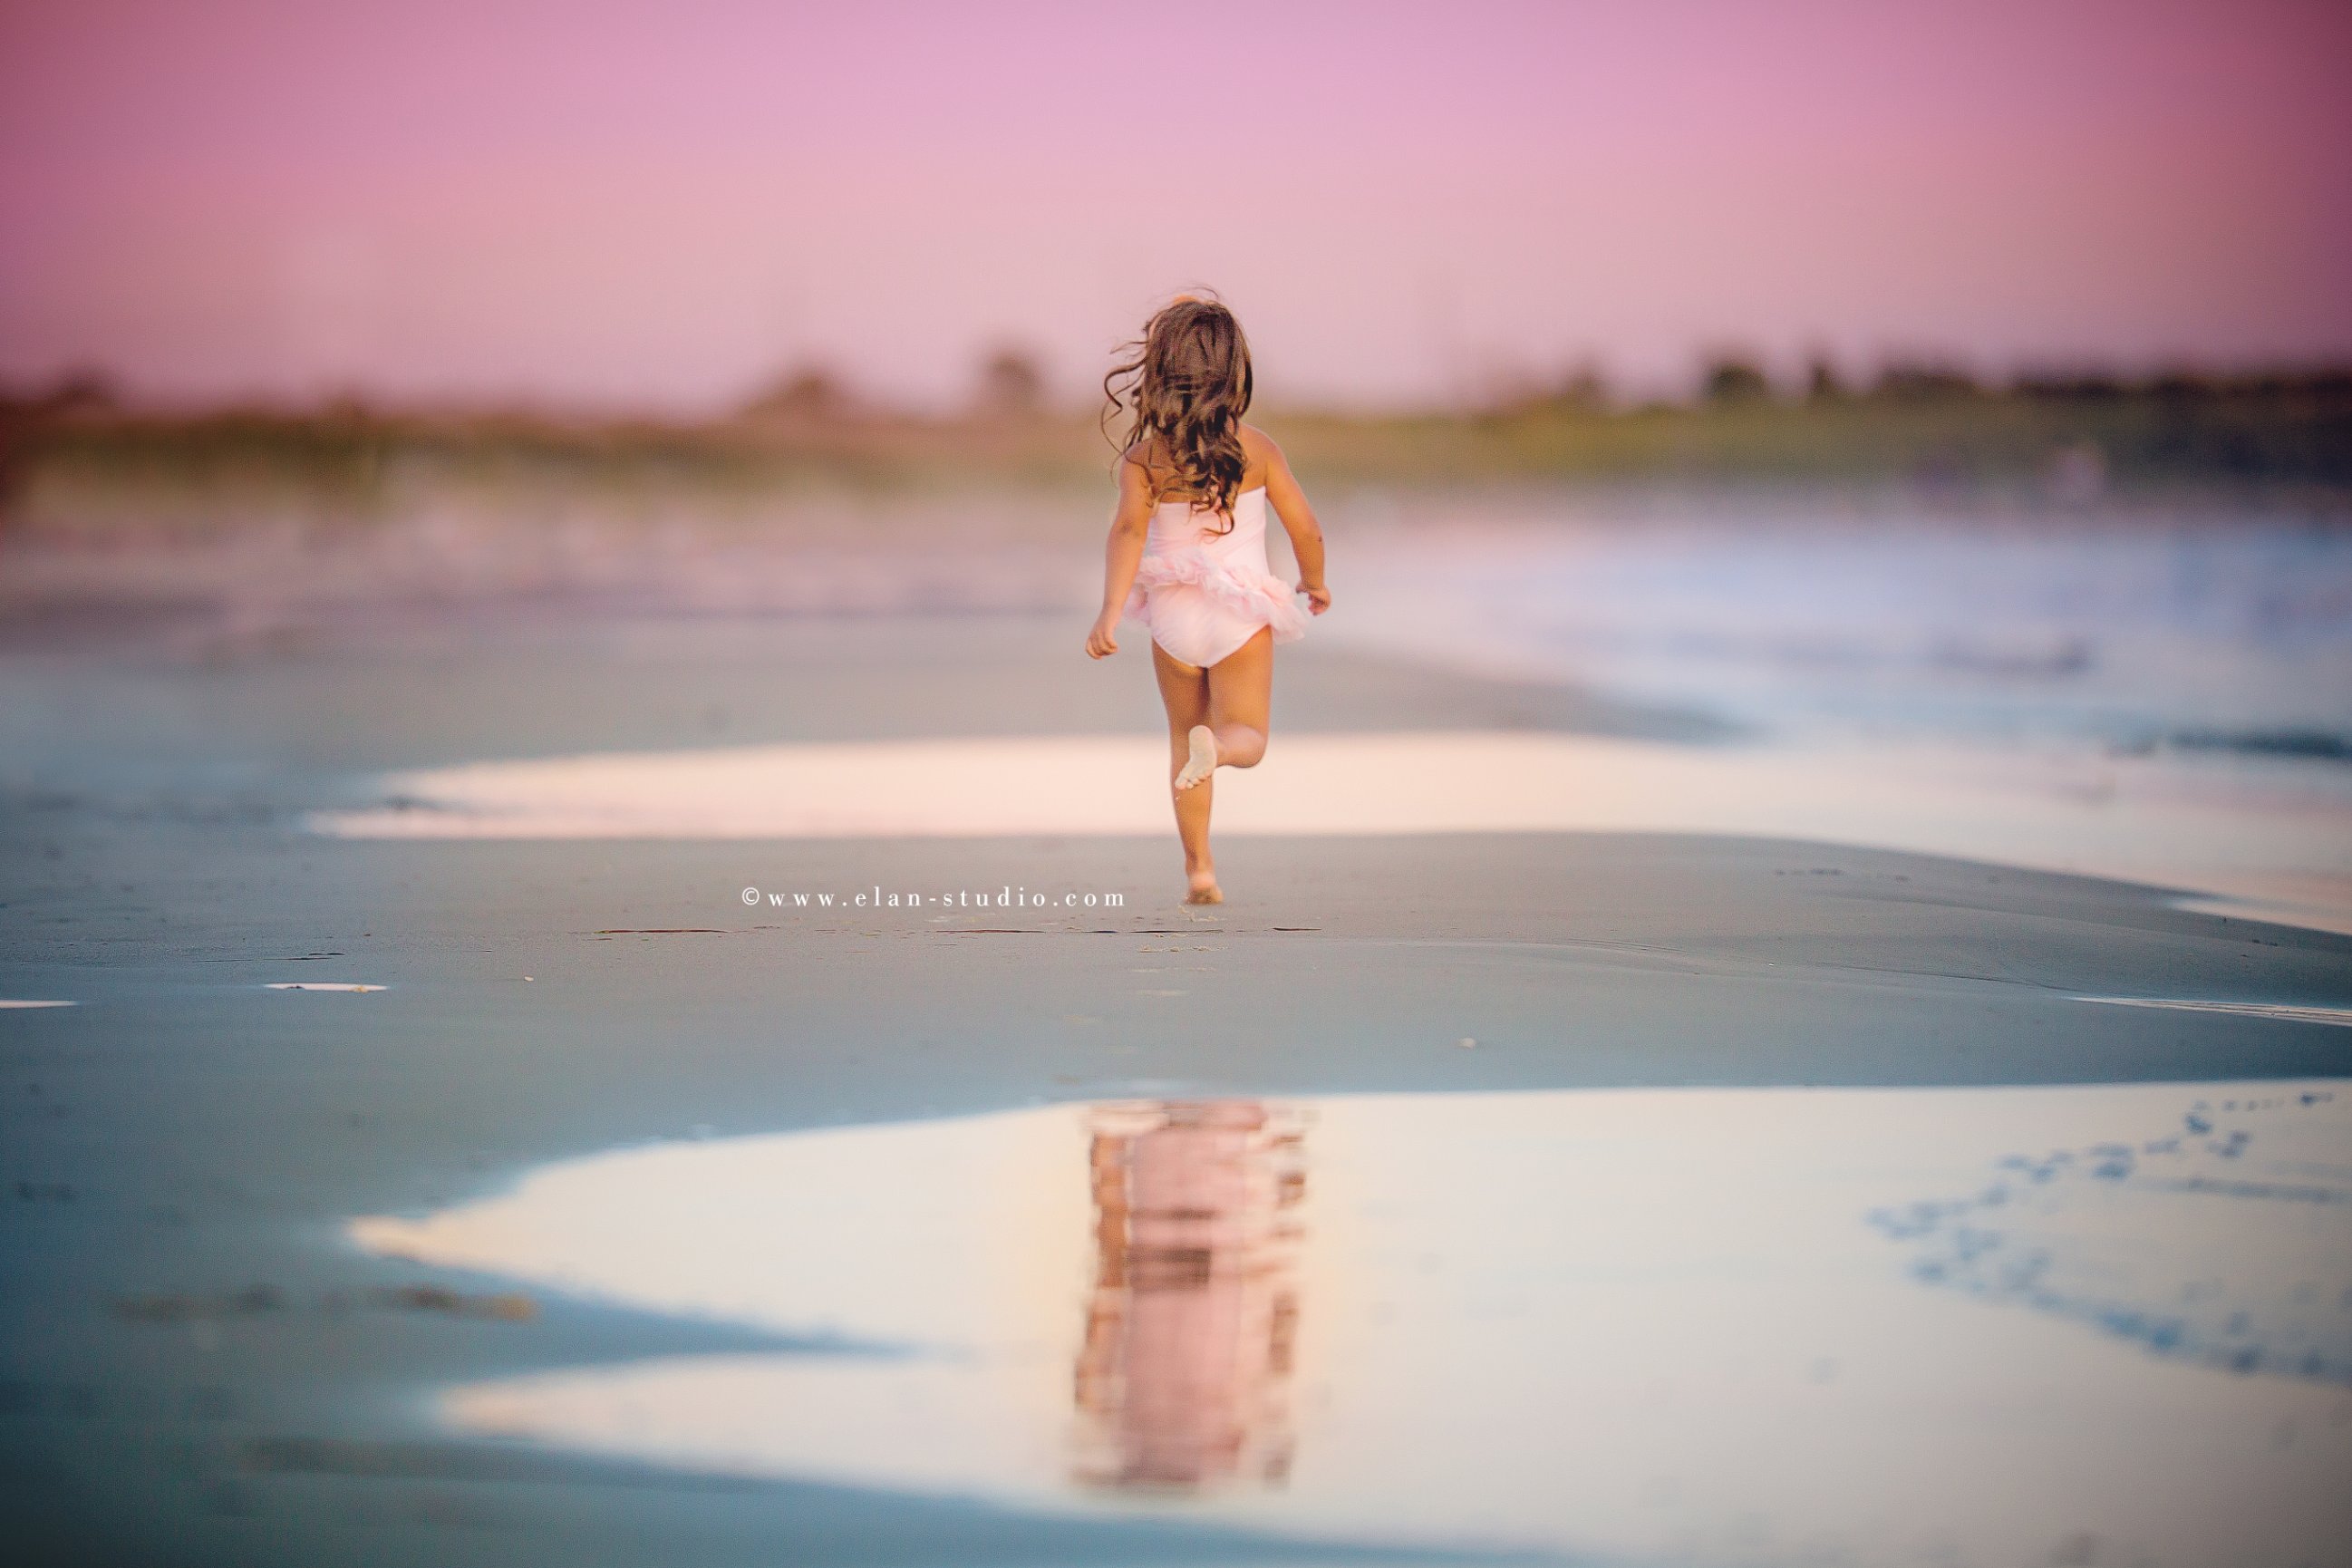 little girl with curly brown hair running away on beach, with her image reflected in pool of water